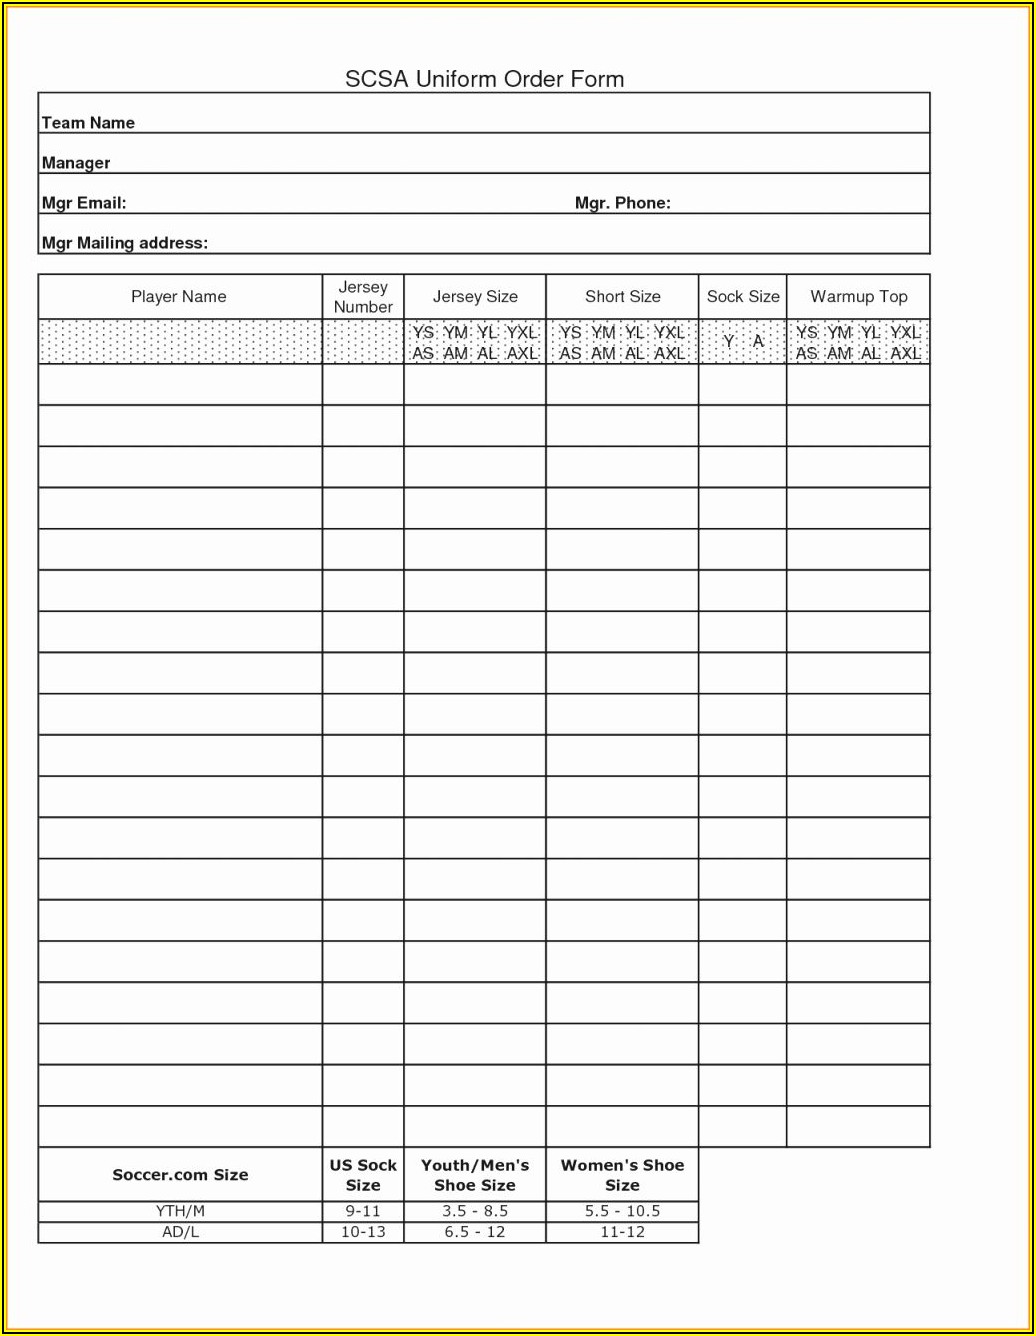 Fundraising Form Template Free